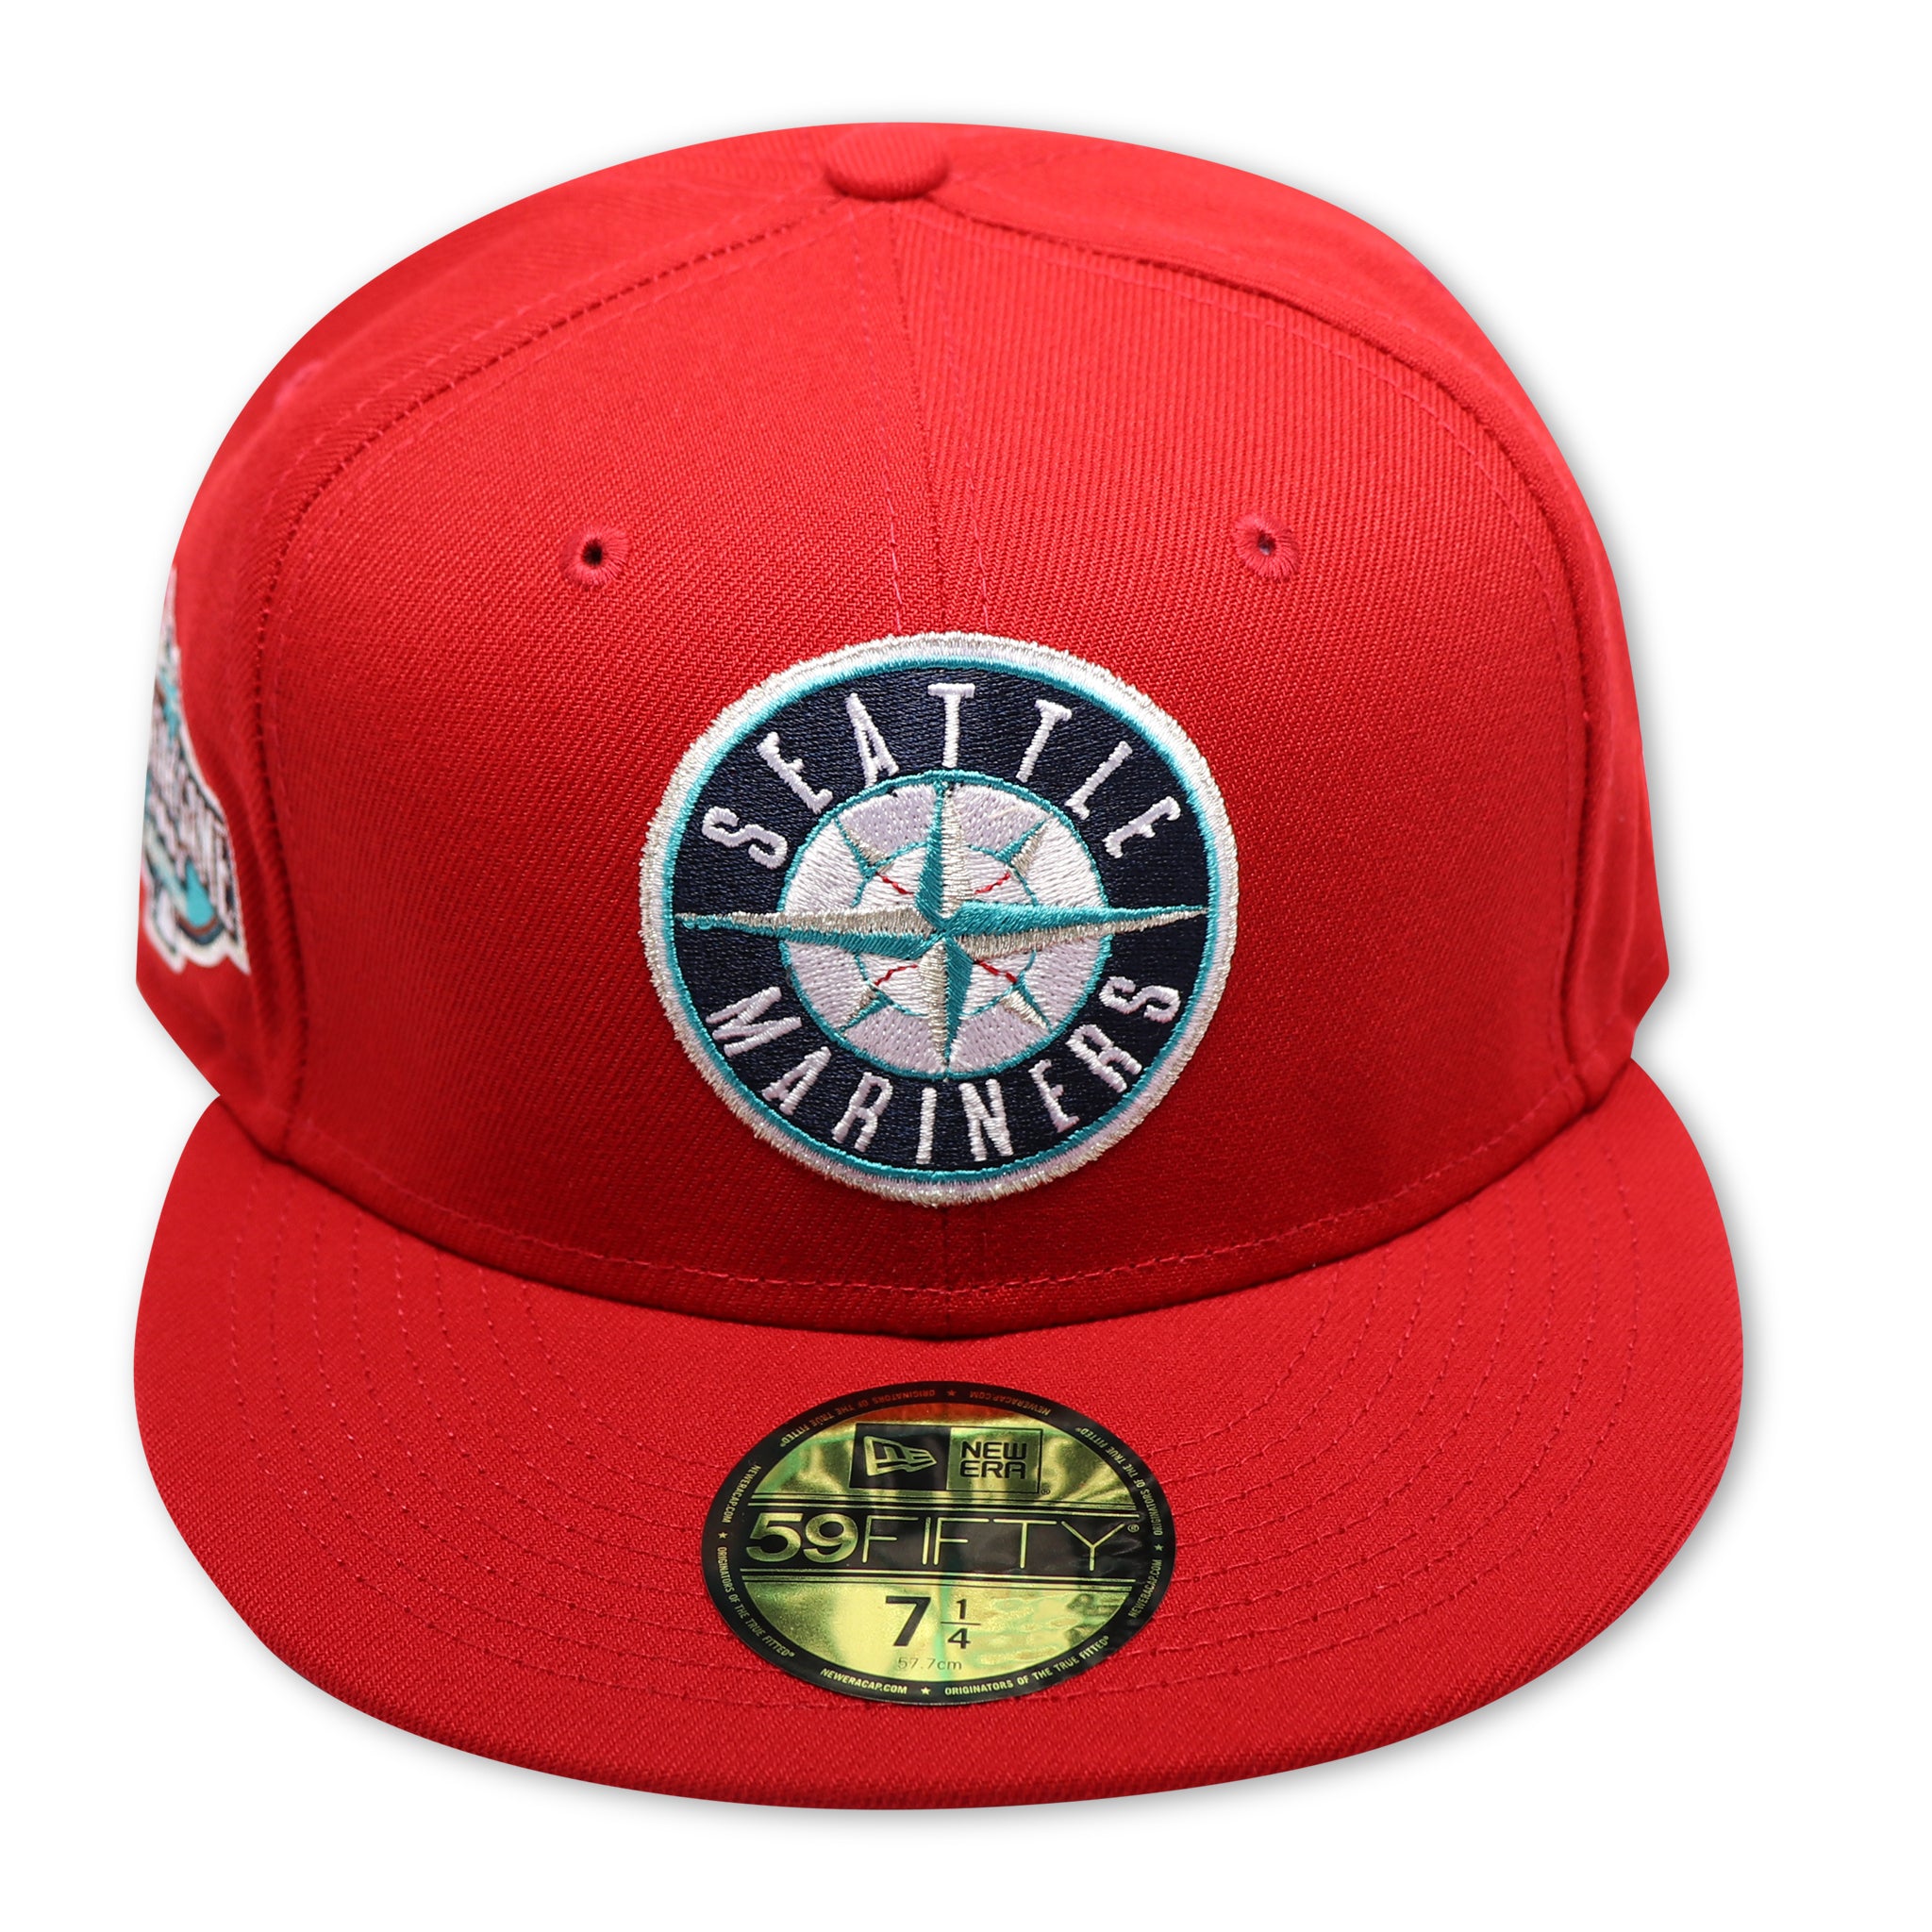 SEATTLE MARINERS (RED) (2001 ALLSTARGAME) NEW ERA 59FIFTY FITTED (AQUA UNDER VISOR)